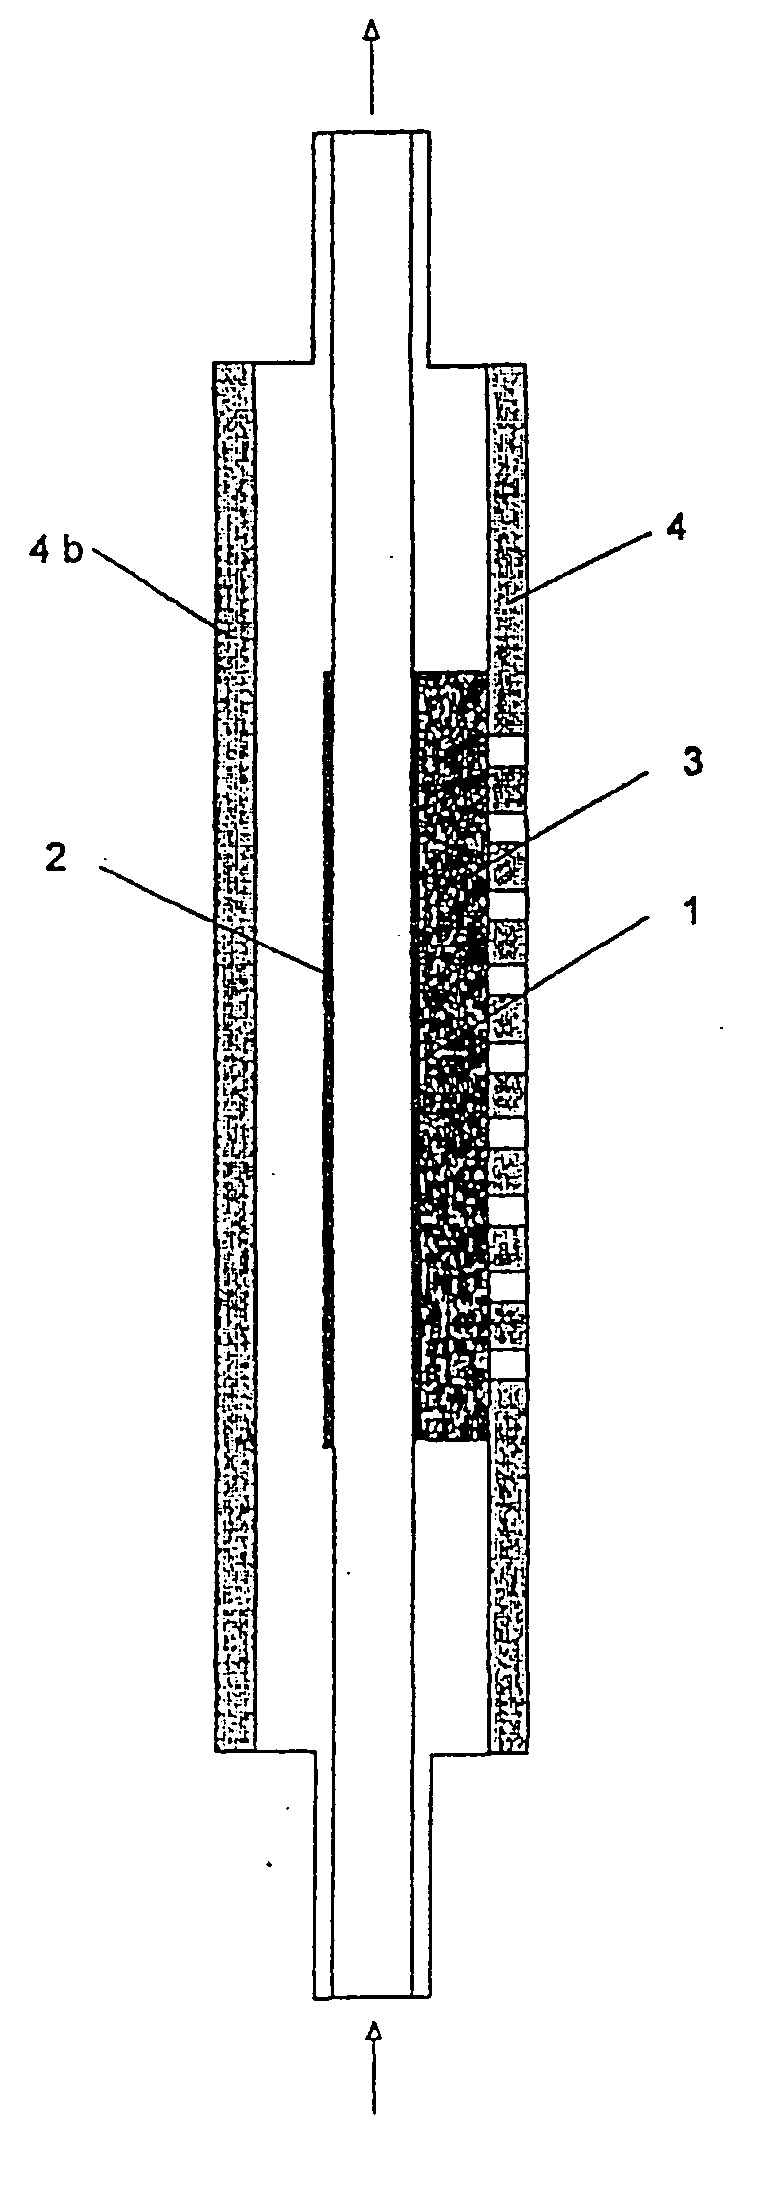 Method for electrolytic water disinfection without cathodic hydrogen evolution